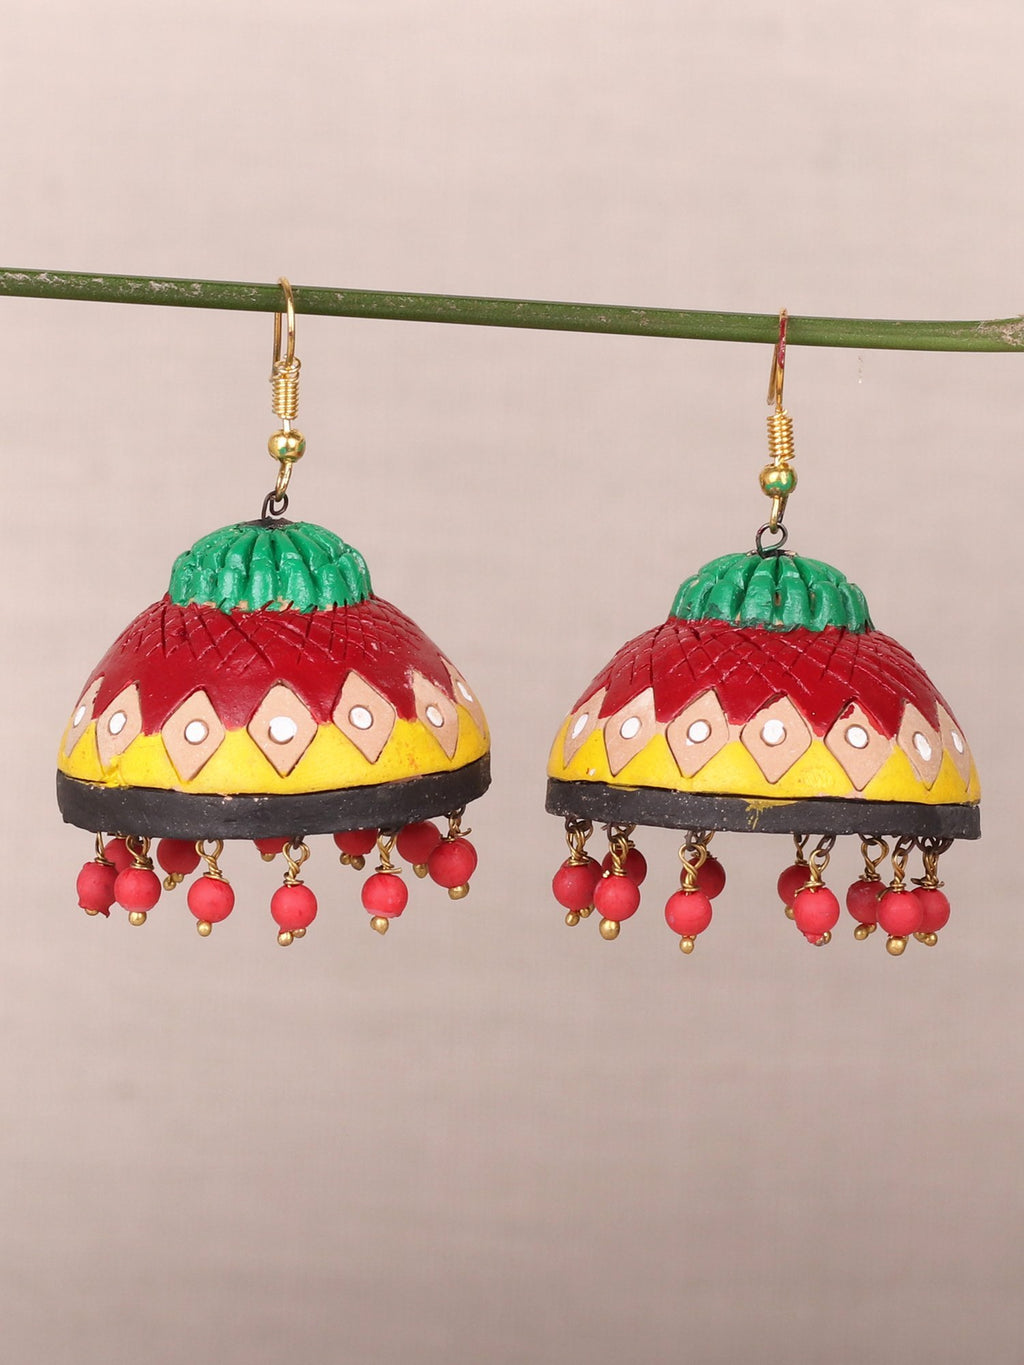 Red and Green Terracotta Clay Jhumka Earrings - A Local Tribe